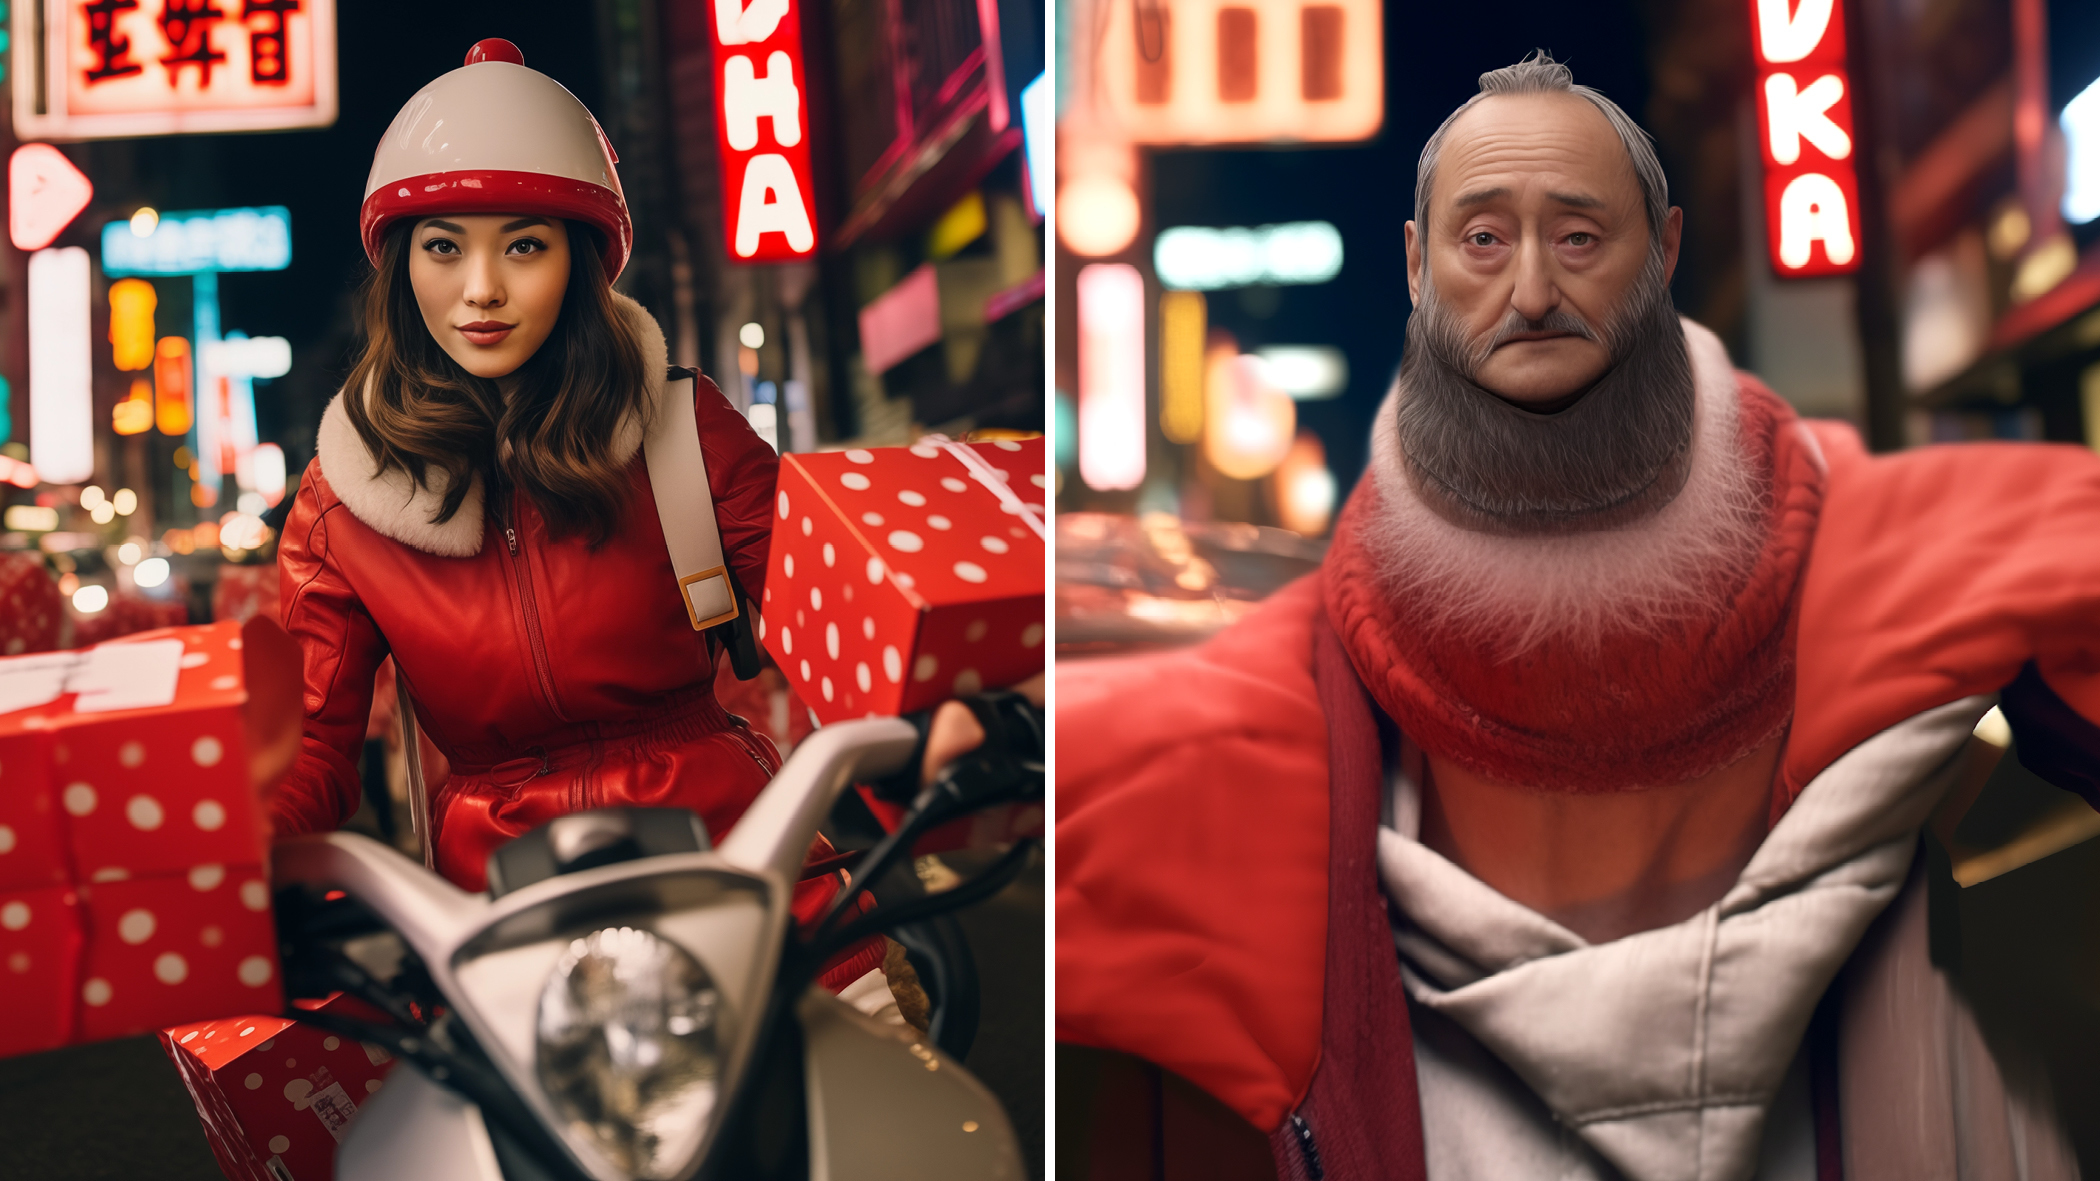 The image begins with an individual in a vibrant urban night setting wearing red festive clothing riding a scooter carrying packages. It morphs into an older, bearded person wearing heavy red robes in a similar pose in the same setting.